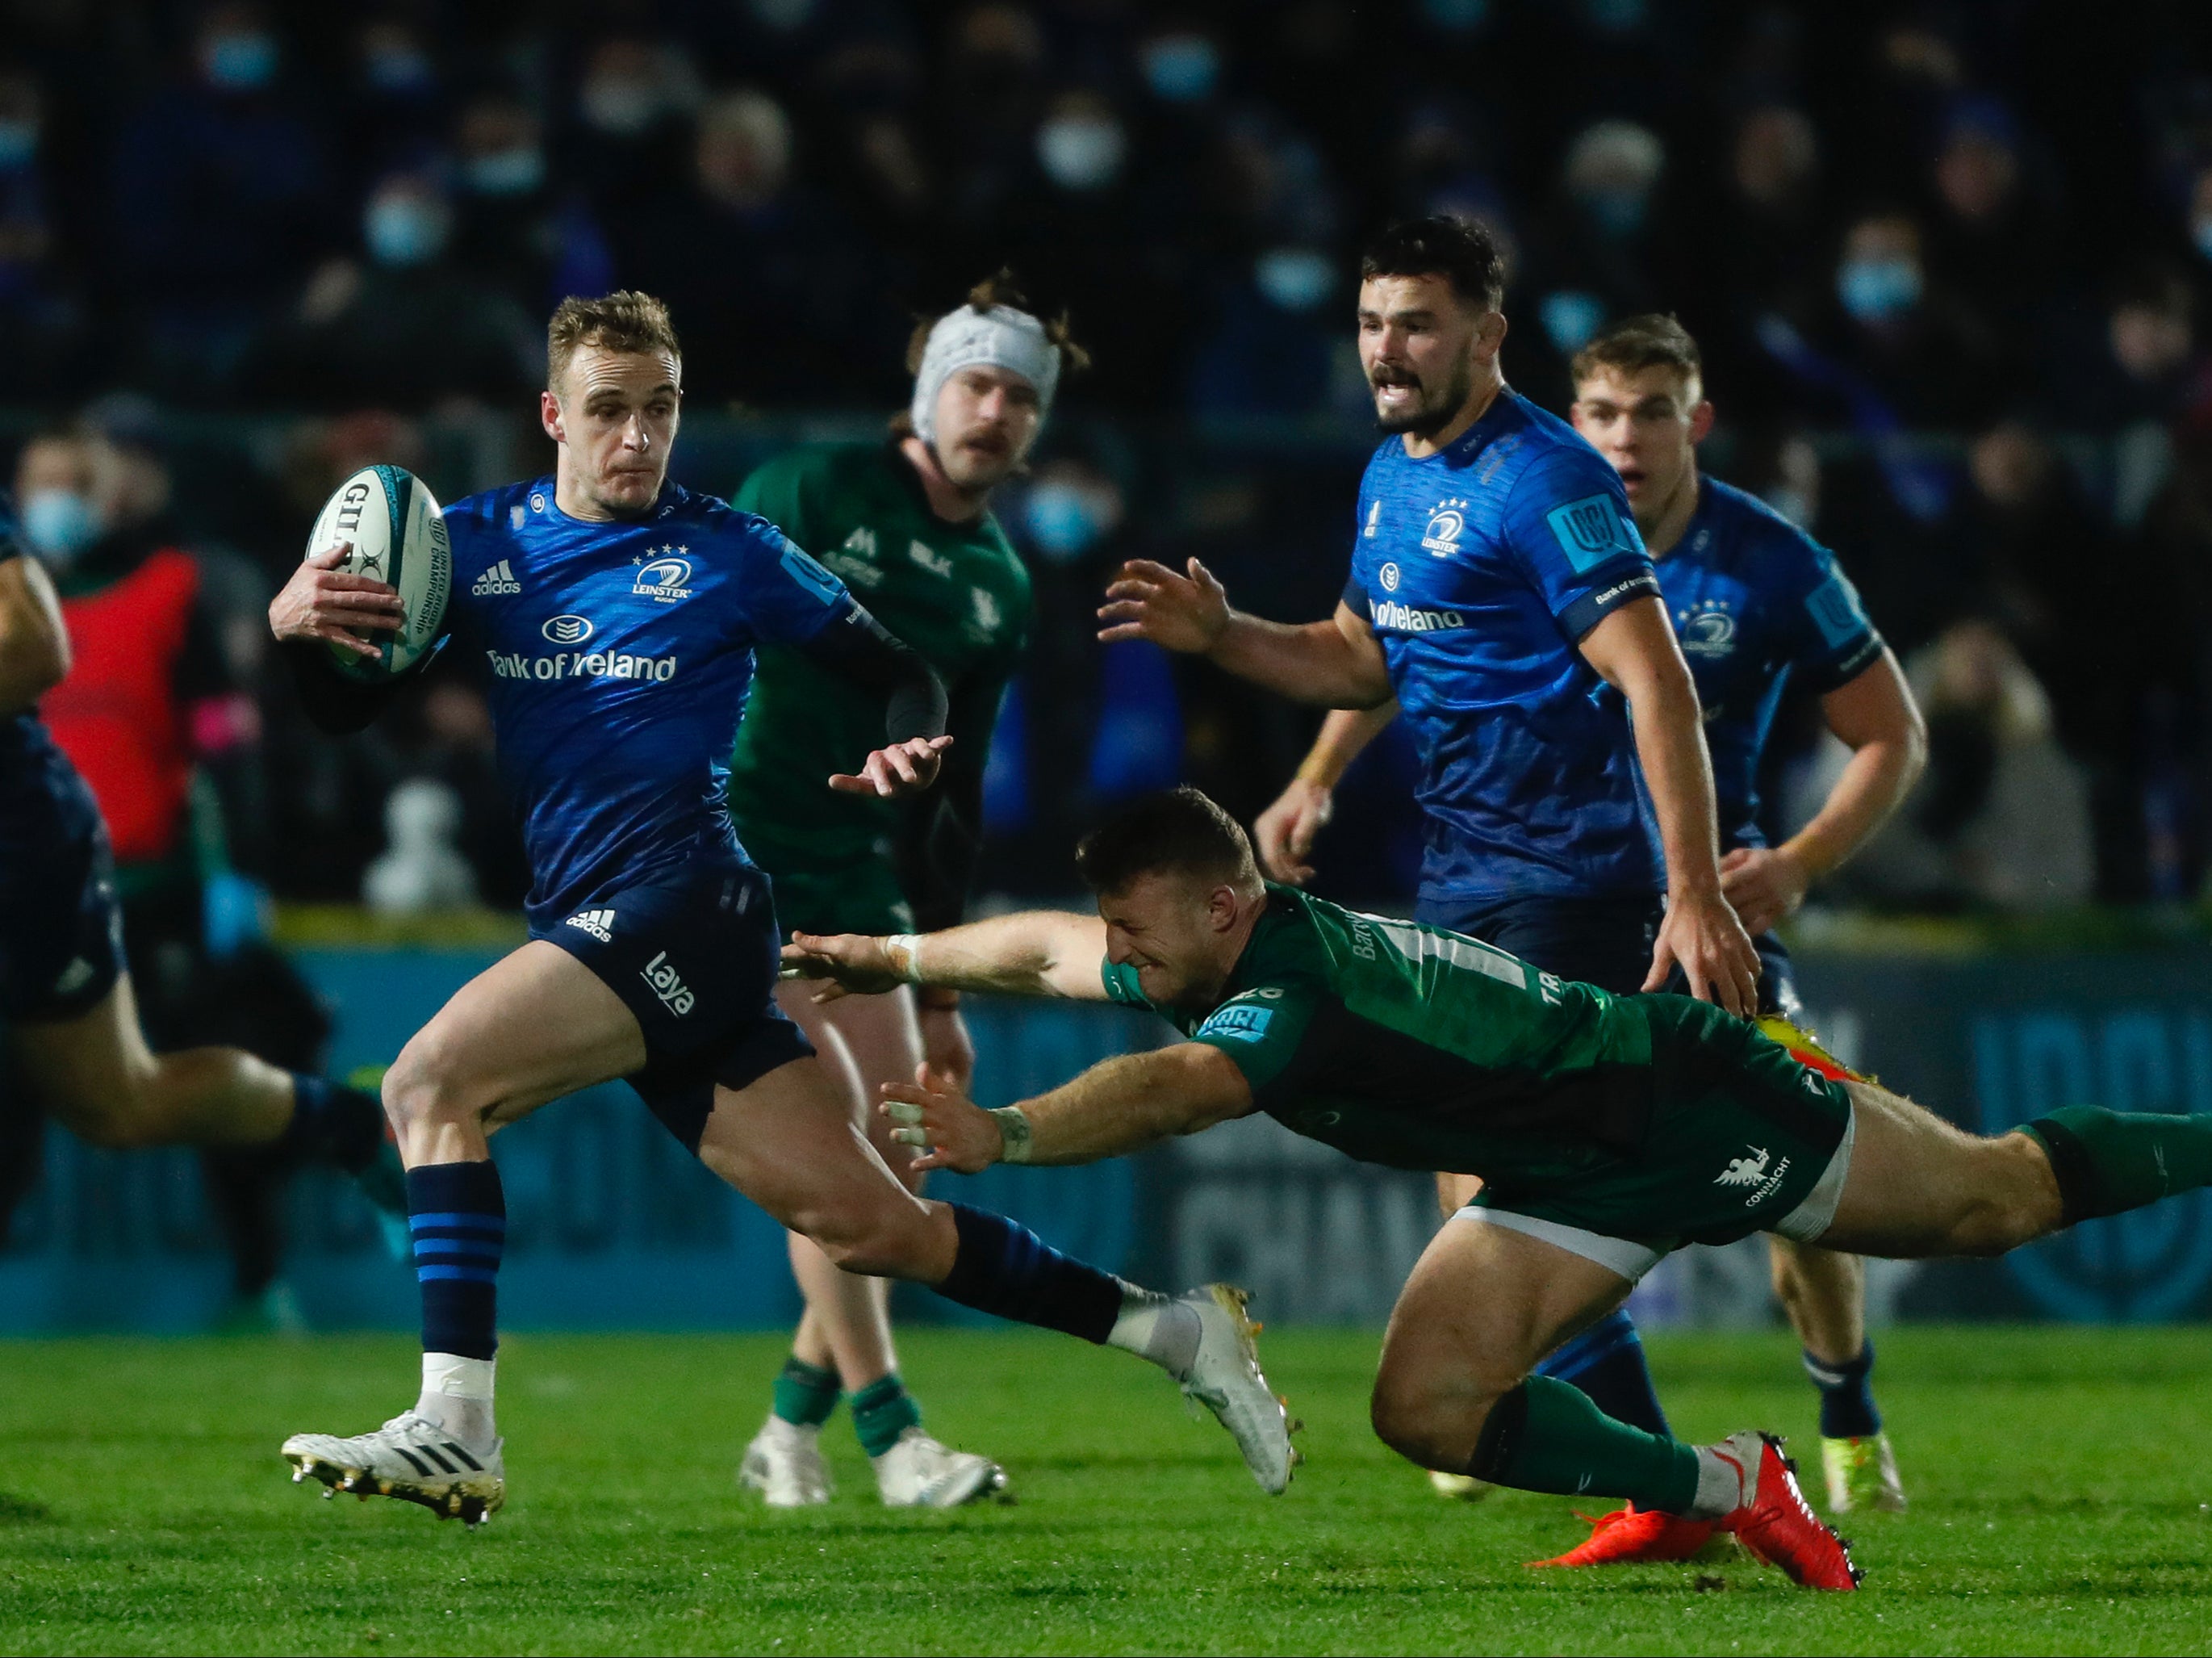 The 27-year-old Leinster scrum-half said his experience has been ‘entirely positive’